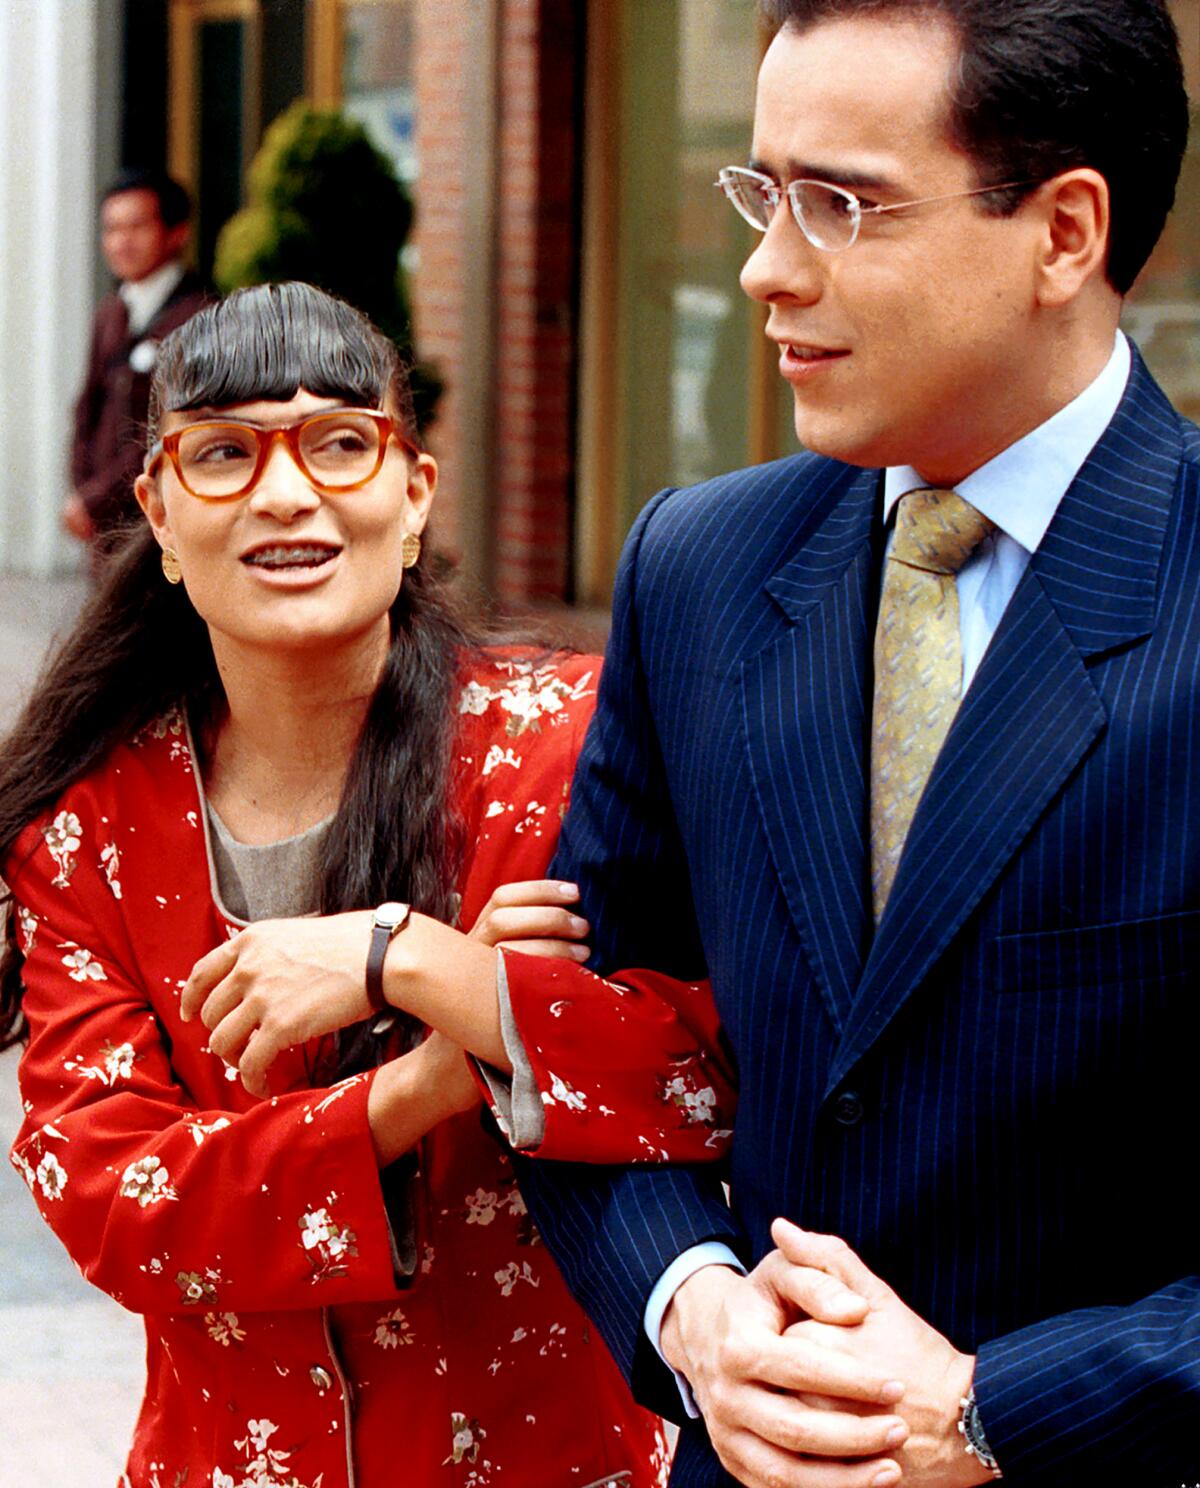 A woman in a red dress and red-rimmed glasses looks the man a suit next to her.